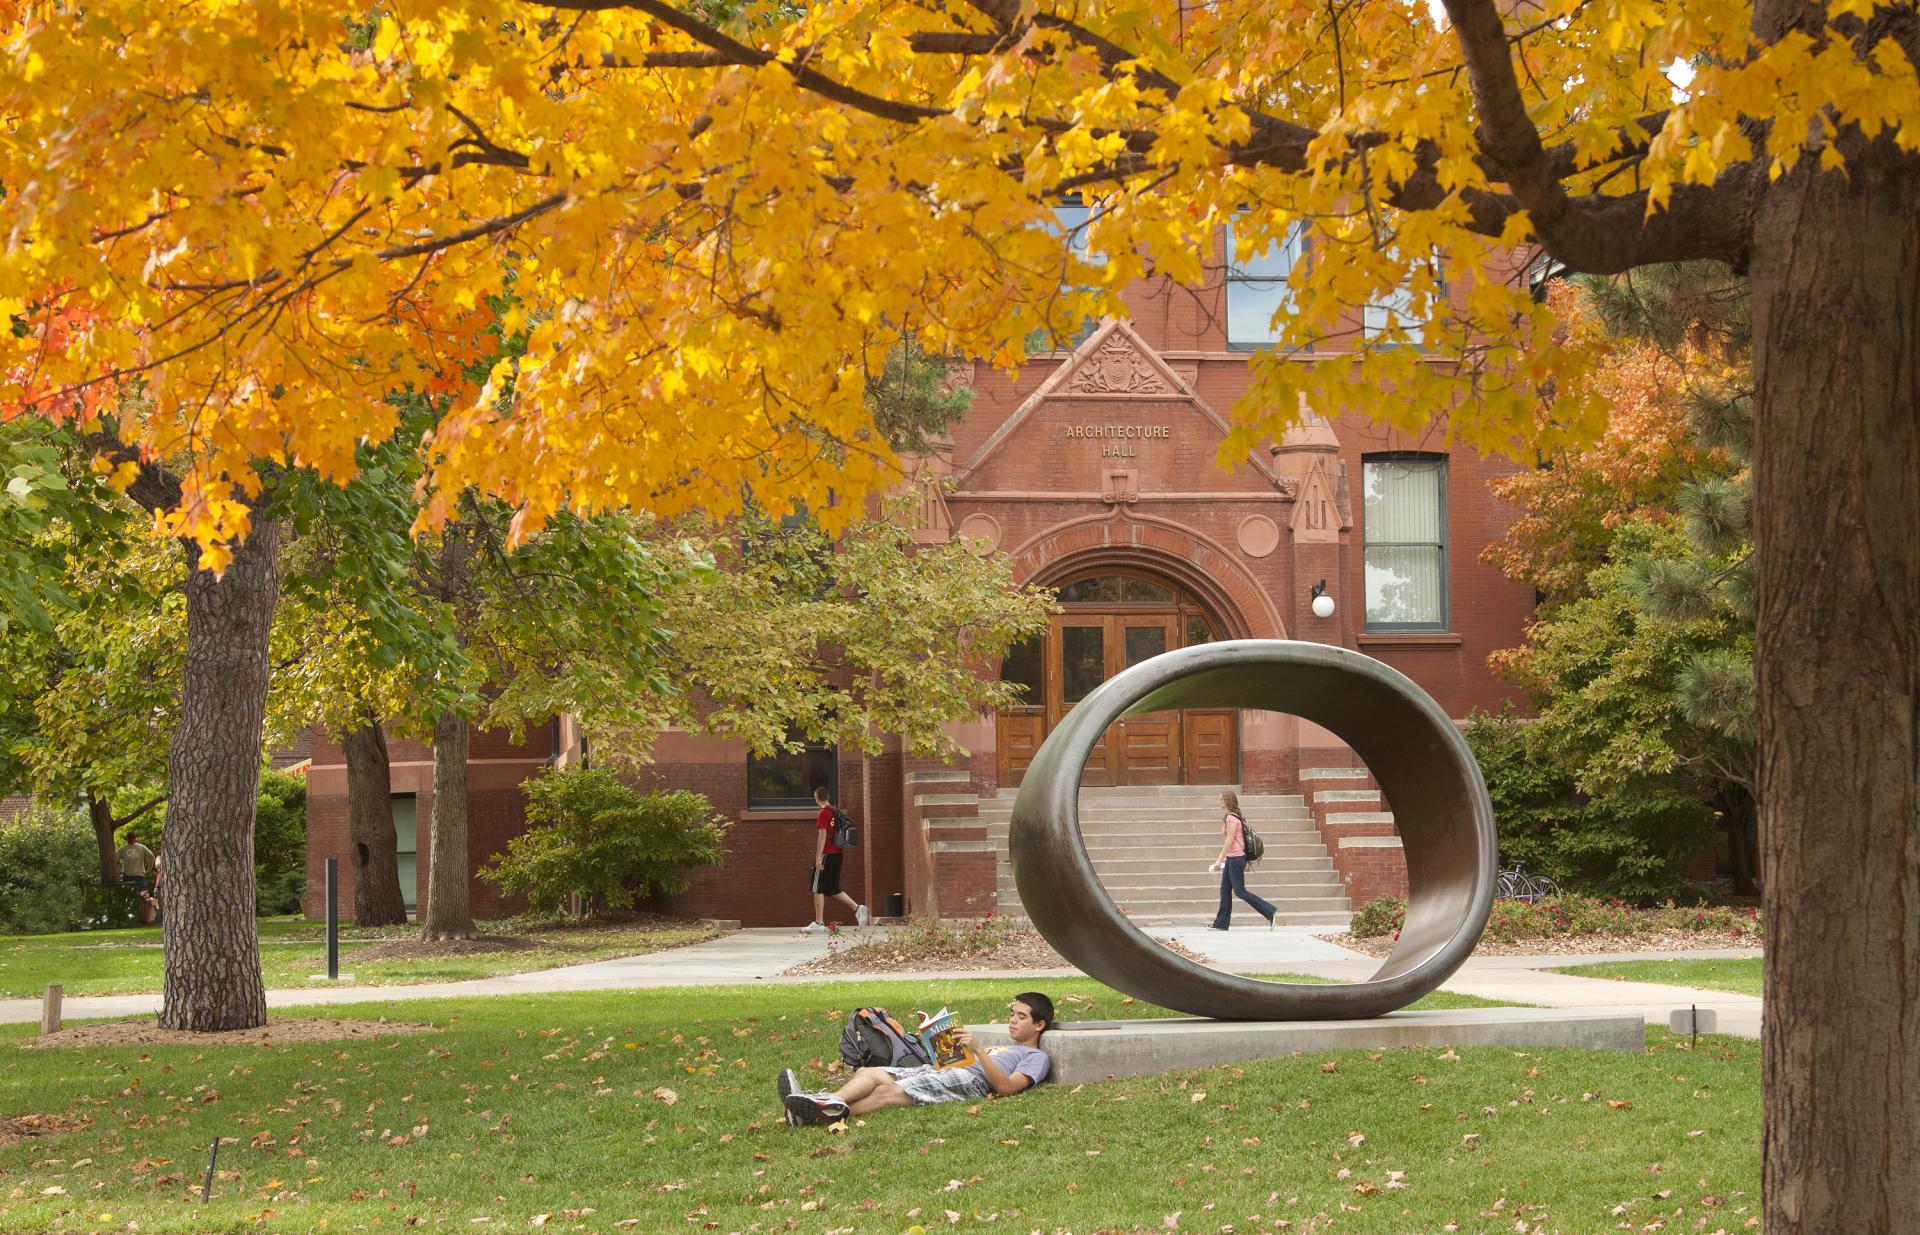 Student reads outdoors on campus surrounded by fall foliage